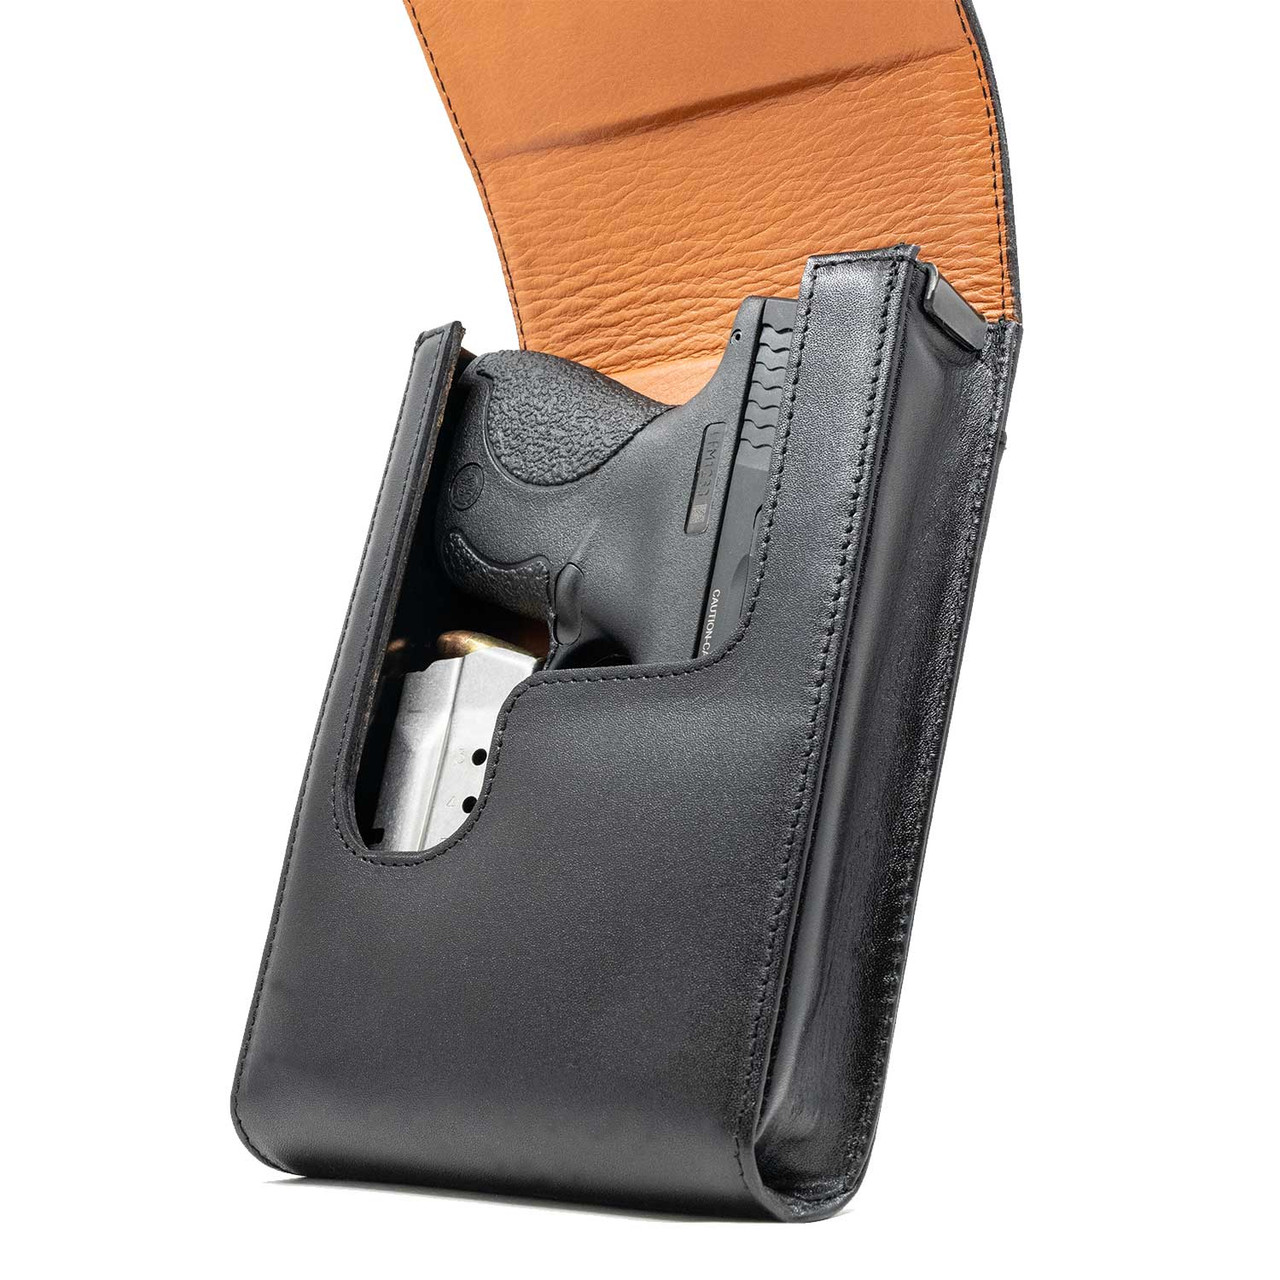 The Rohrbaugh .380 Xtra Mag Black Leather Holster